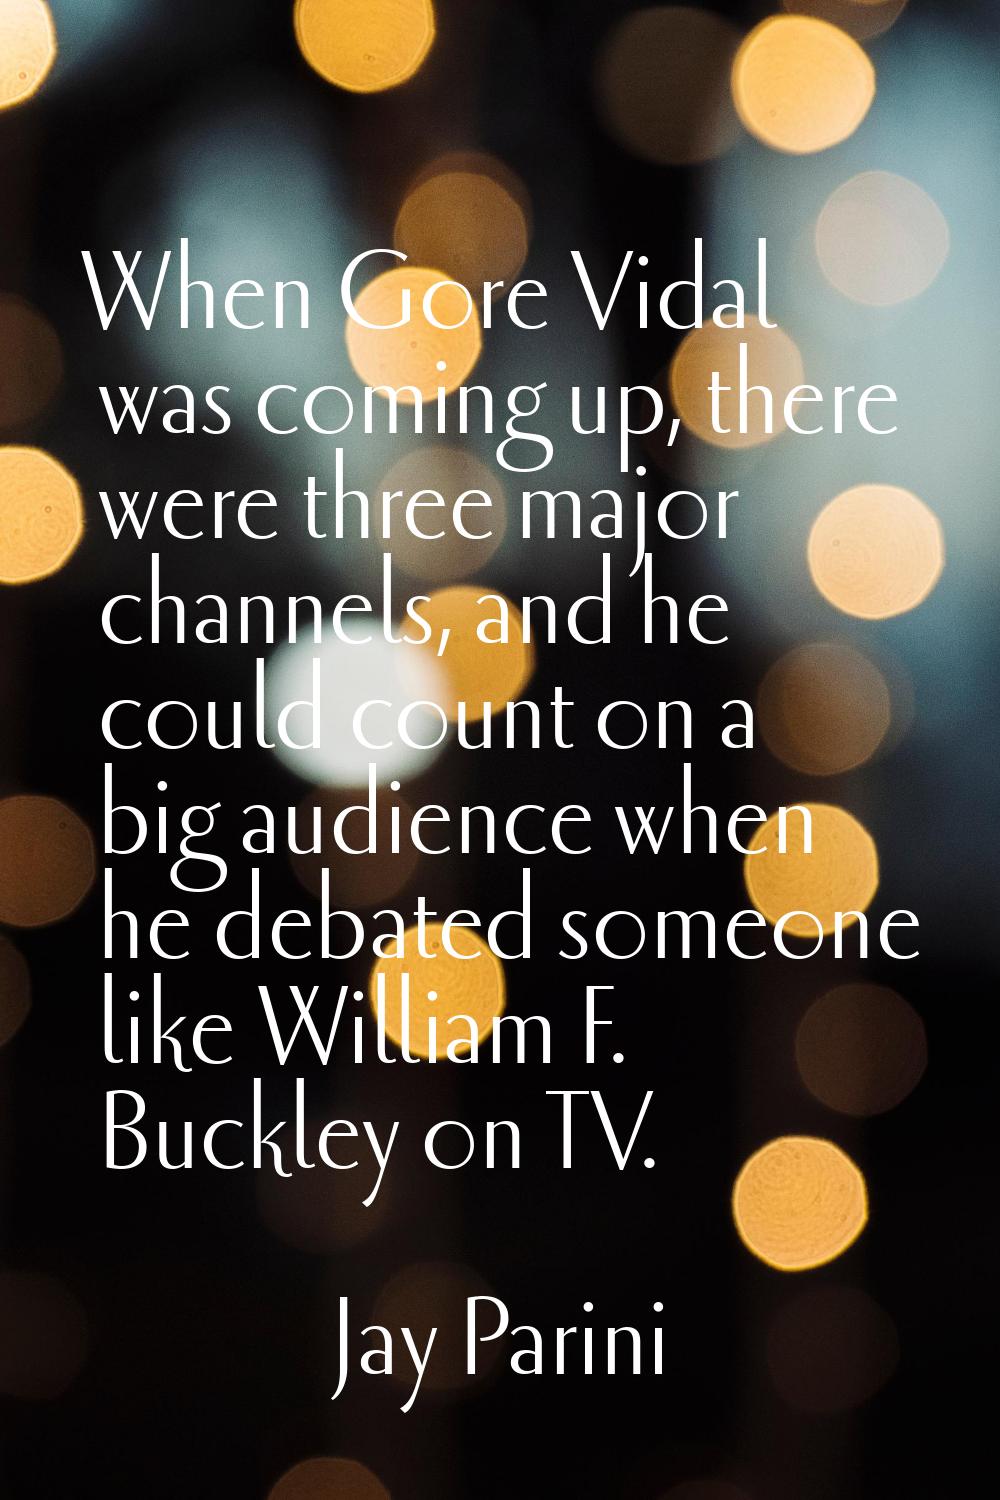 When Gore Vidal was coming up, there were three major channels, and he could count on a big audienc